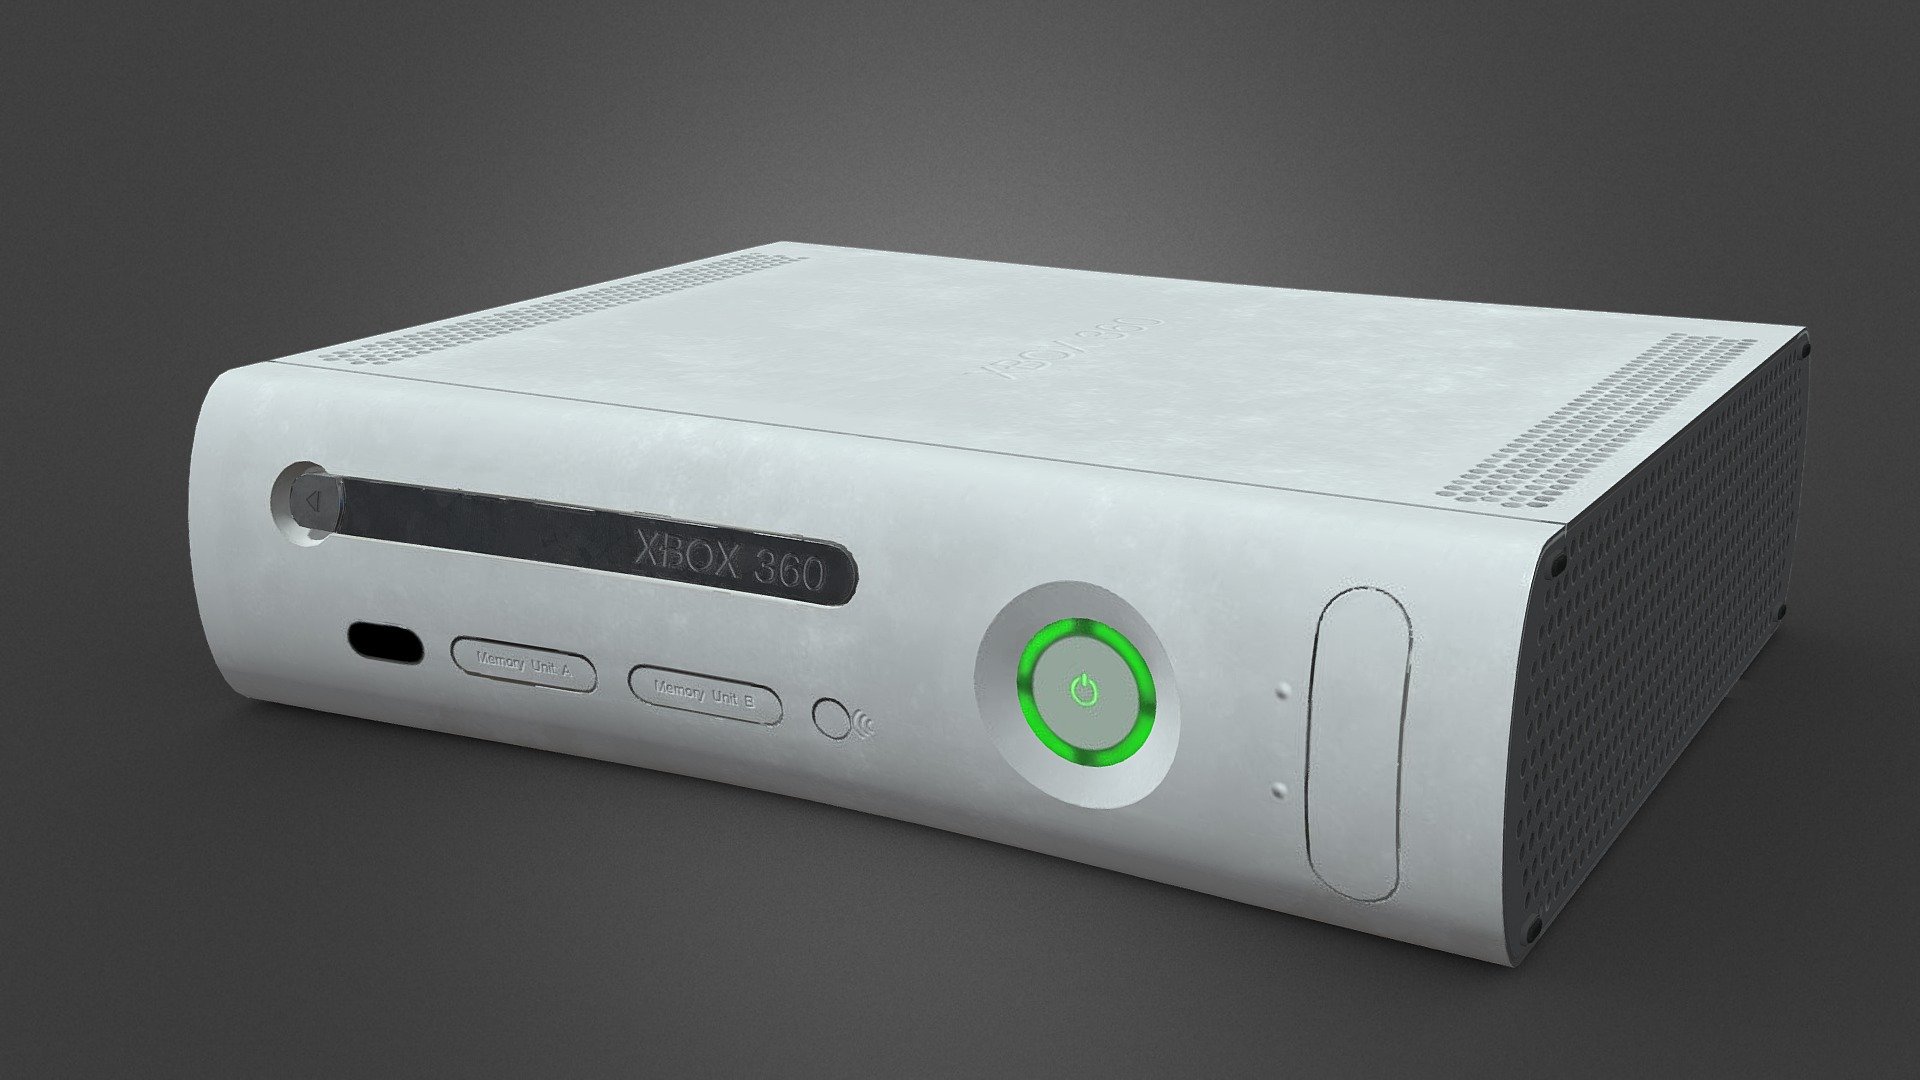 This is a Model of the original XBOX 360 released on November 22nd 2005 and does not contain the installable hard drive at the top of the console.

This model was created in Blender and textured in Substance Painter. I first created a high poly model of the Xbox adding in the circular vents into the mesh. I then moved to making the low poly version removing unnessesary vertices so the details can be baked later. I kept the indets of the power button, disk drive and back sockets as they were far too promminant to be baked to an effective and visual standard.

Additional Files
* Final model
* Blender File
* Textures for Sketchfab, Unity and Blender
* Substance painter file
* High/low-poly used for baking
This will allow you to edit the model or textures if needed 3d model